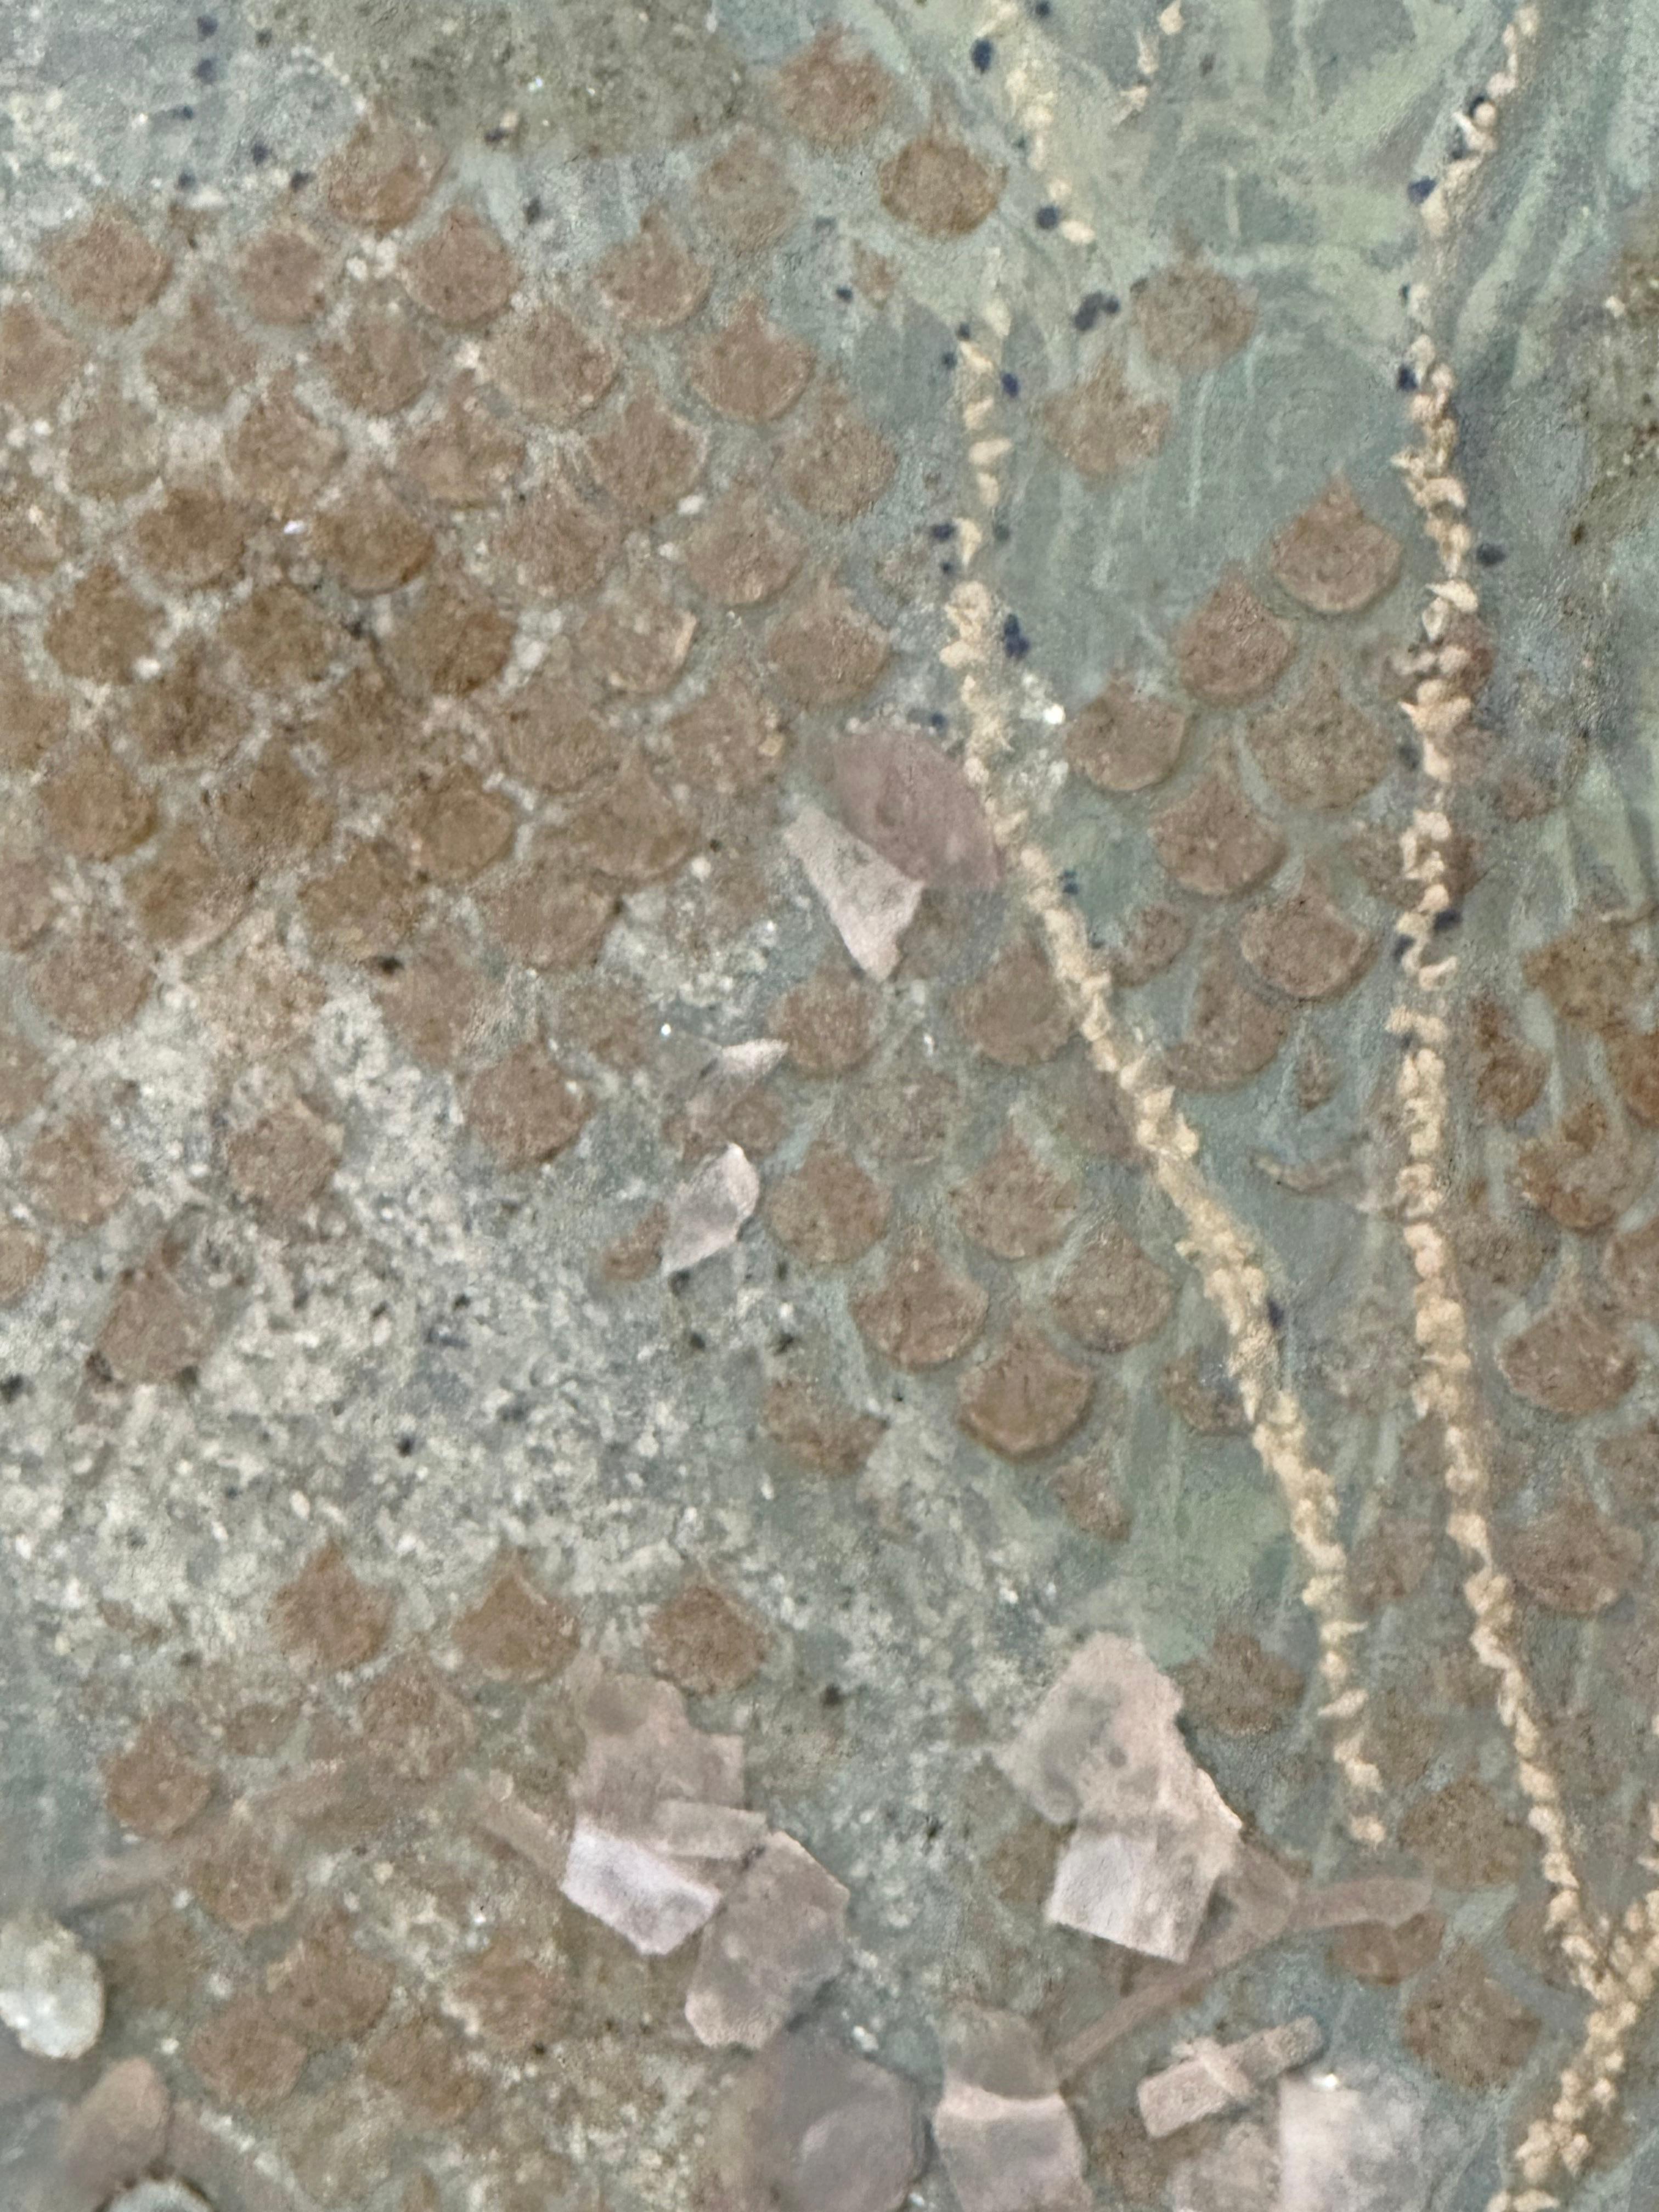 Carefully applied nontraditional materials including limpet, abalone, conch, mother of pearl shell, crushed moonstone, aquamarine, lepidolite, mica, lapis lazuli, and sand create surface texture in intricate patterns on luminous light blue painted